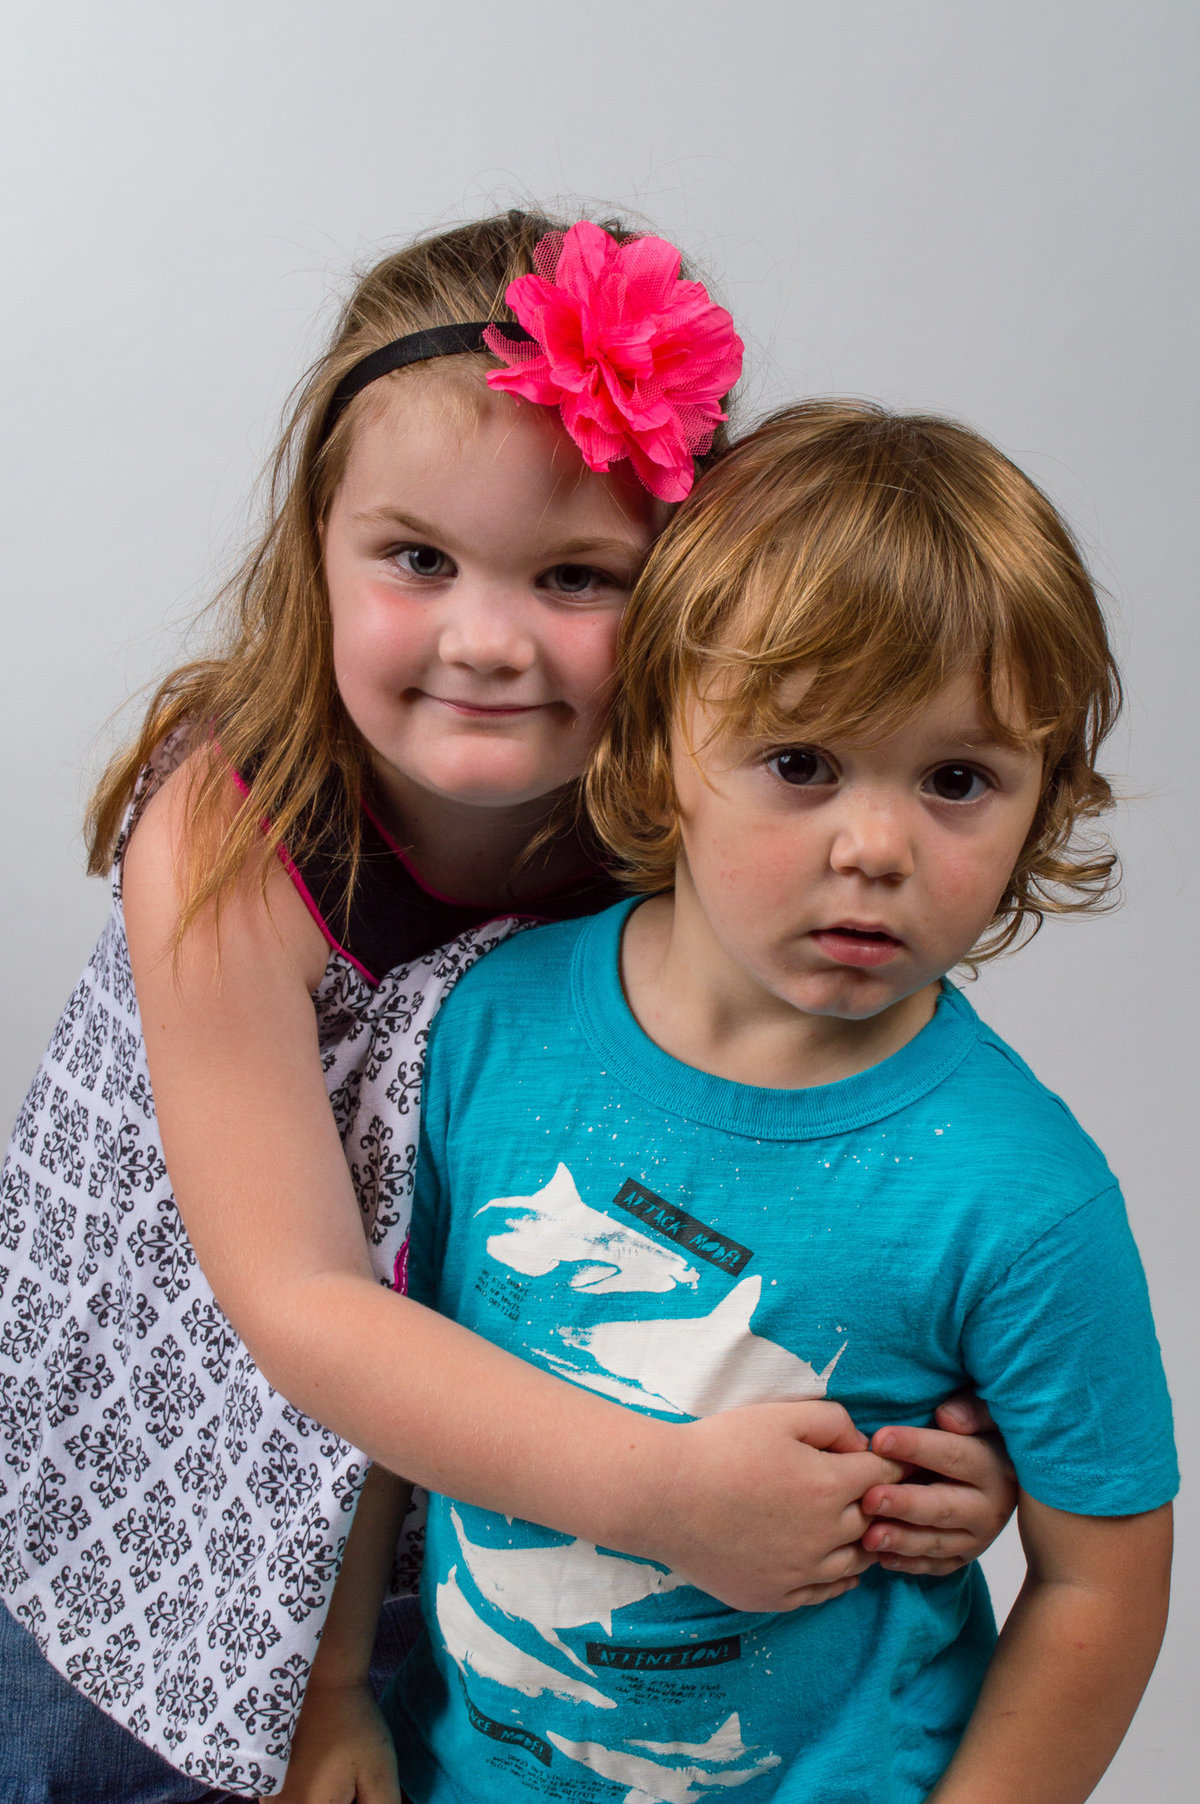 Siblings hug during their studio photography session